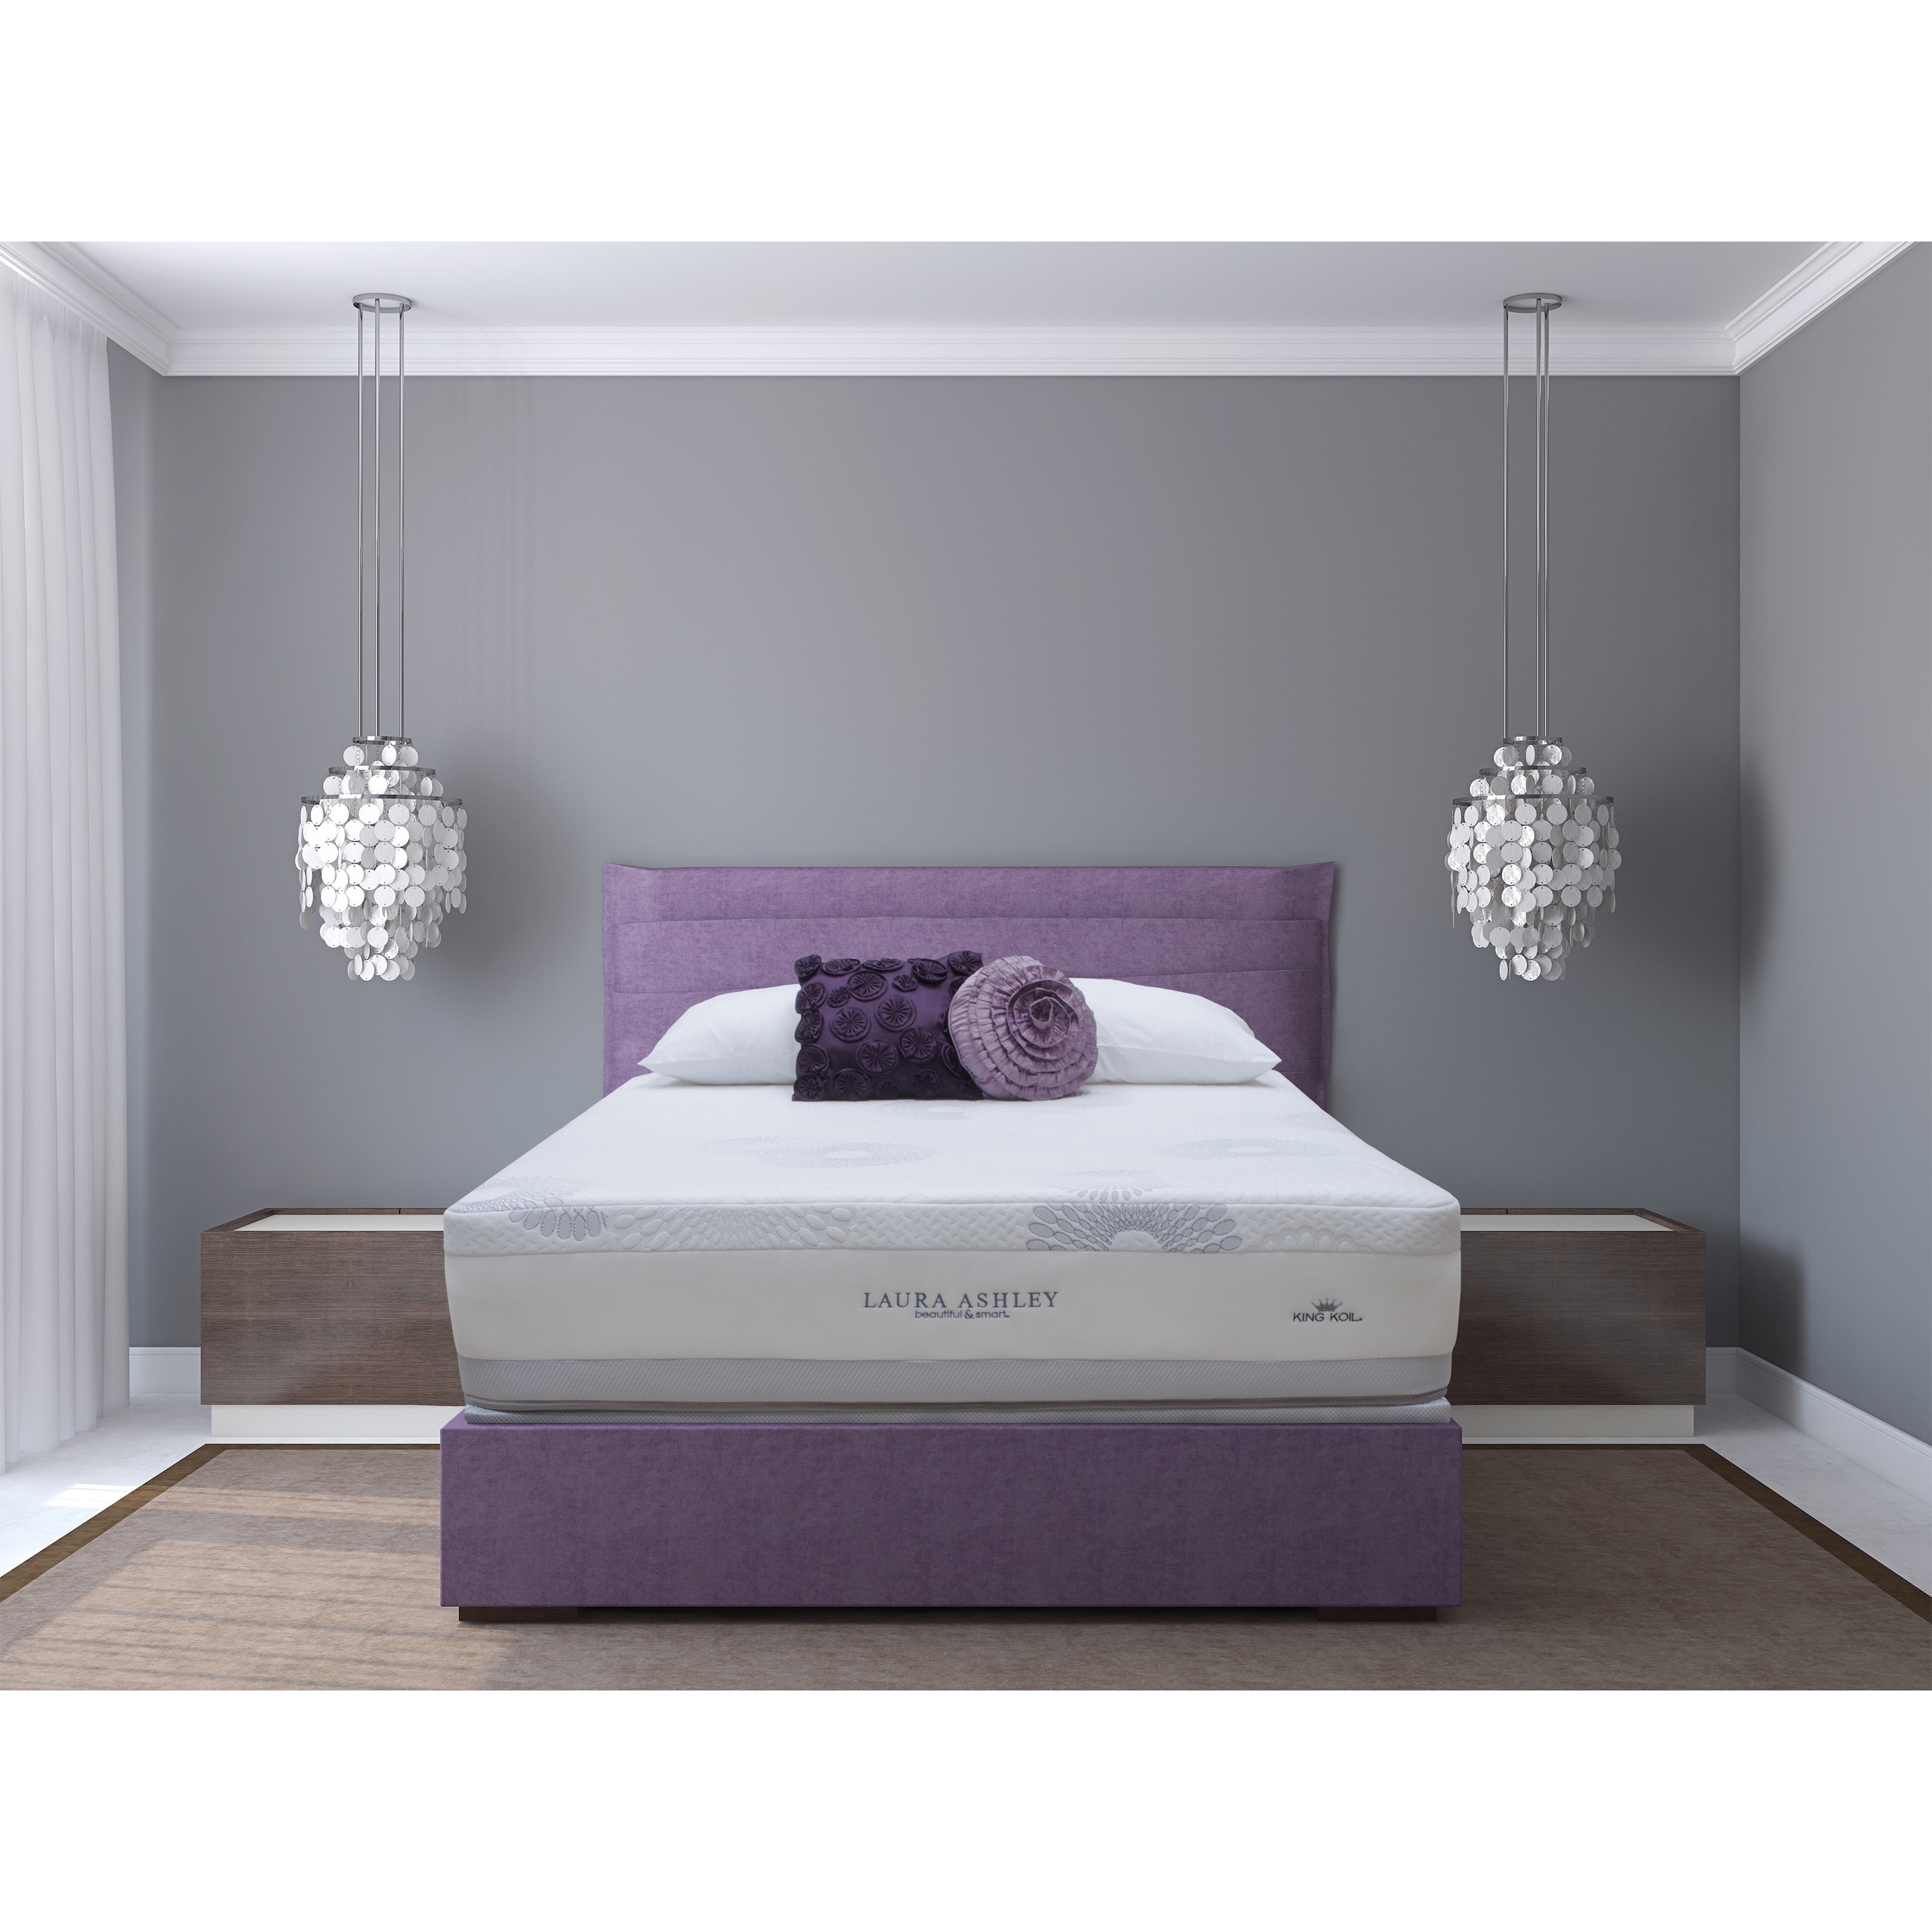 Laura Ashley Blossom Firm Queen size Mattress And Foundation Set (QueenSet includes Mattress and foundationSupport Contour plus encased coil system   638 individually encased coils (queen coil density) reduce motion transfer to eliminate partner disturb